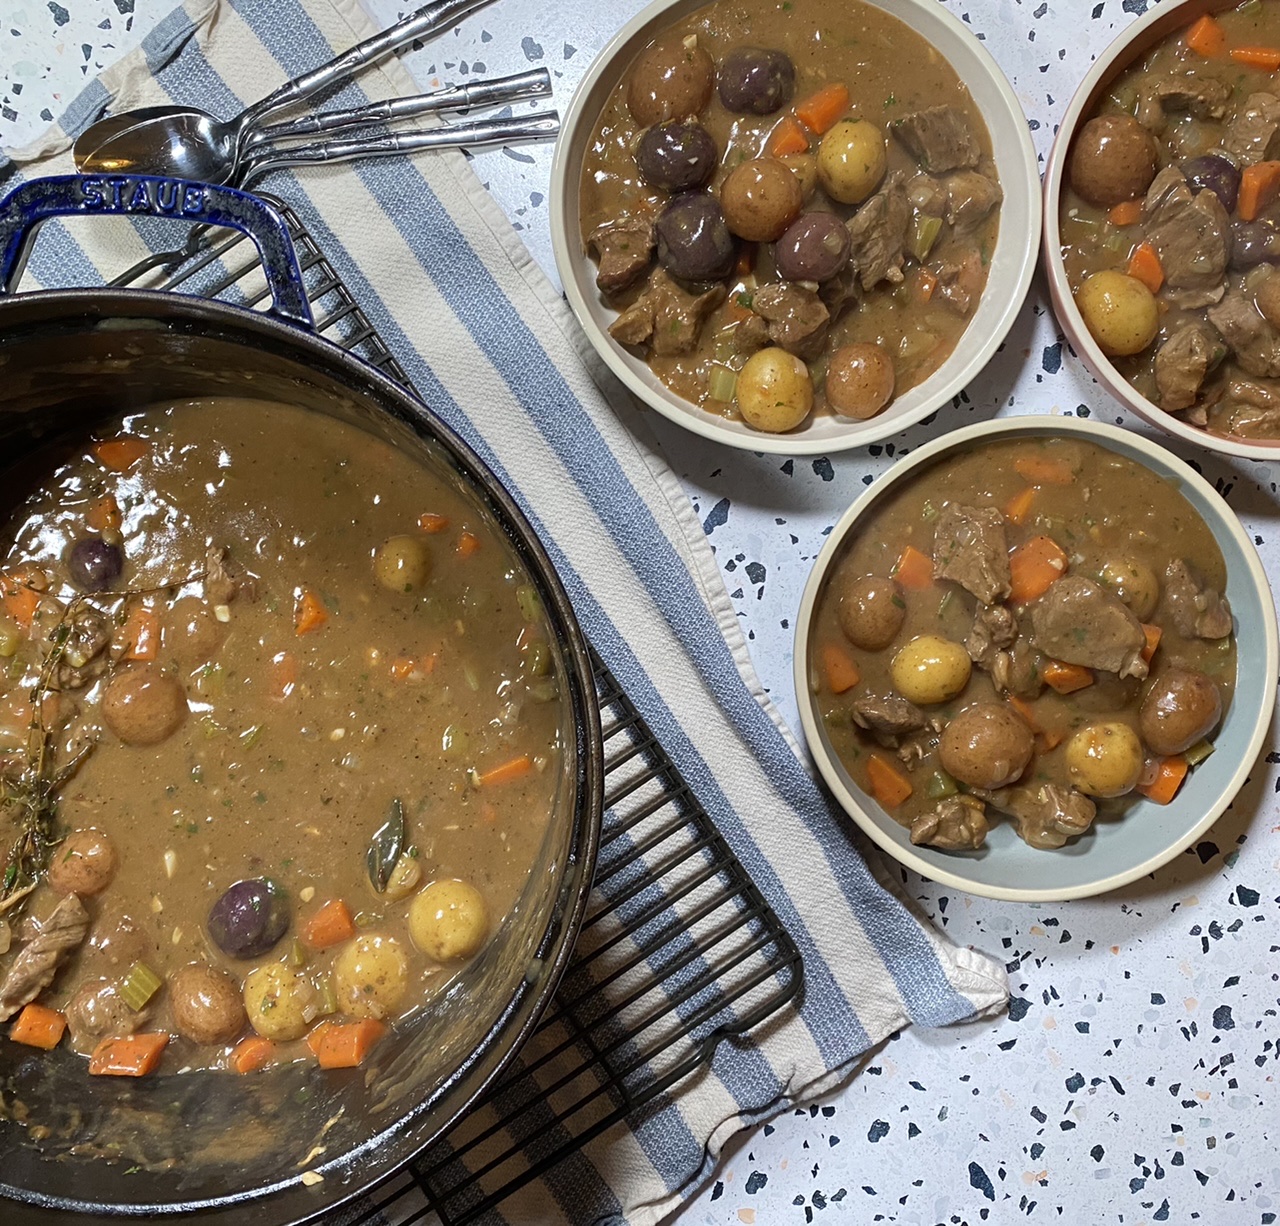 088E2CD6 11A1 4C1D B1C9 B5AAE848F081 - Traditional Irish Lamb Stew with Carrots, Celery, & Potatoes